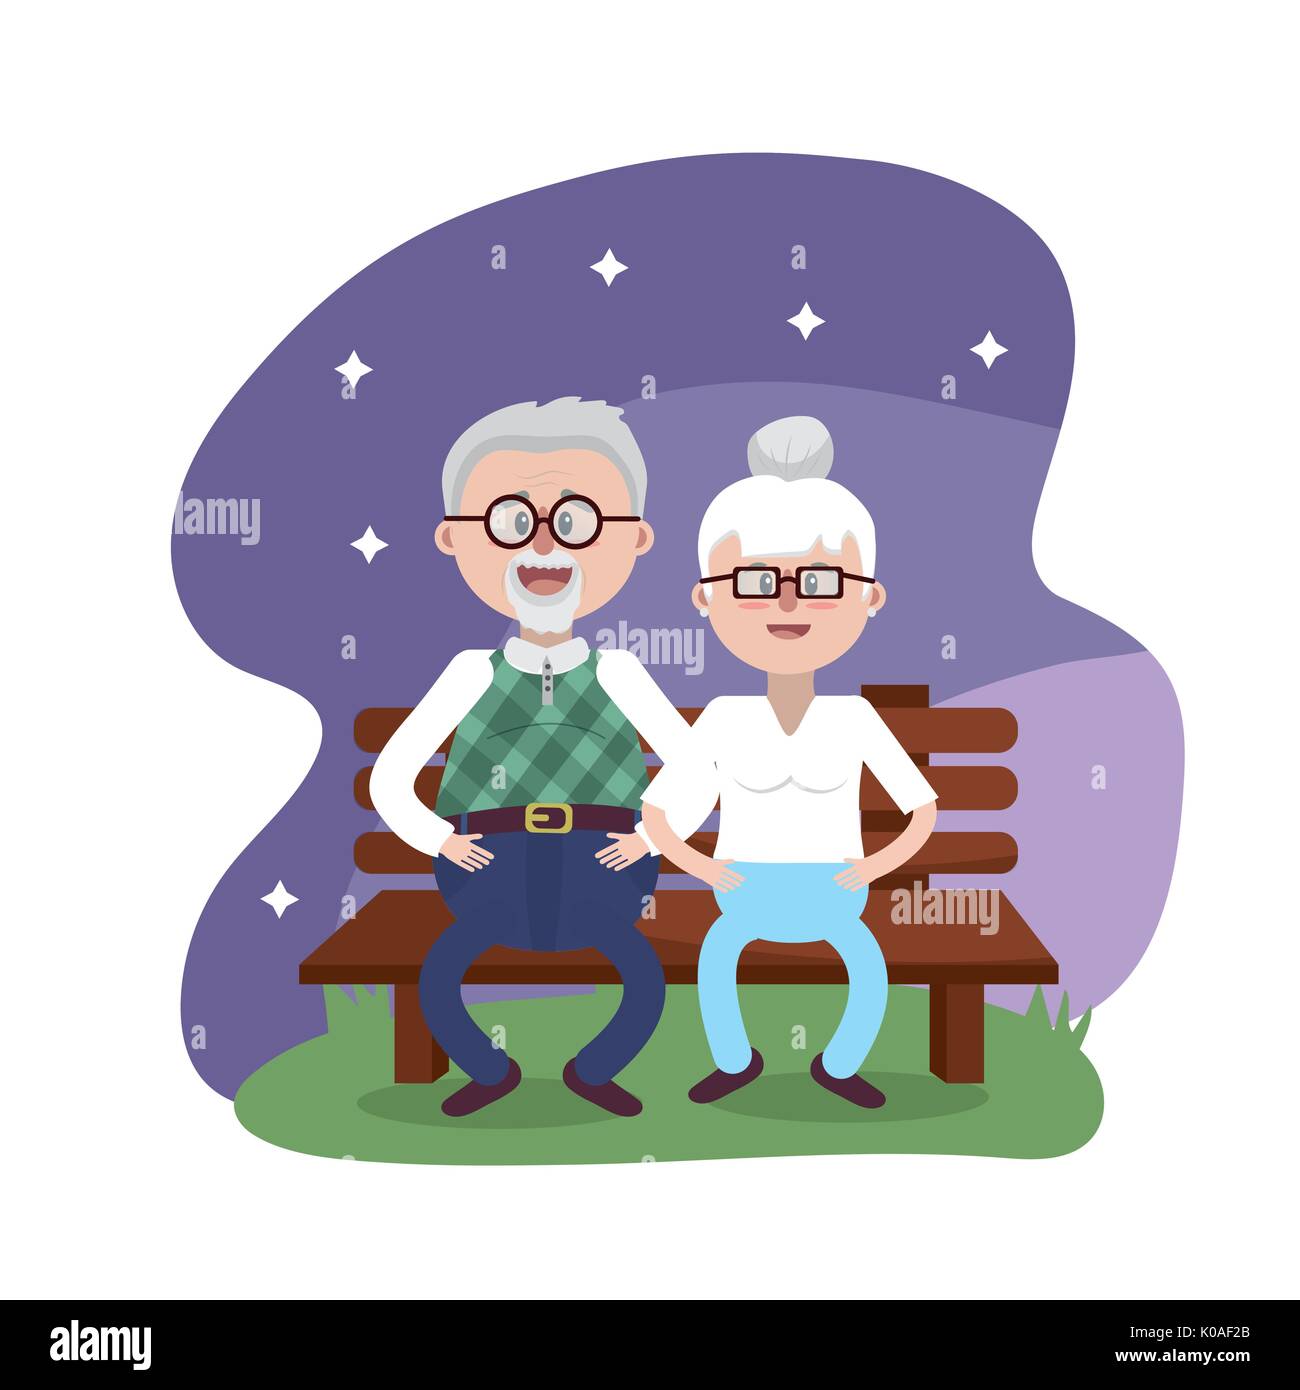 grandparent seated in the chair with glasses and hairstyle Stock Vector